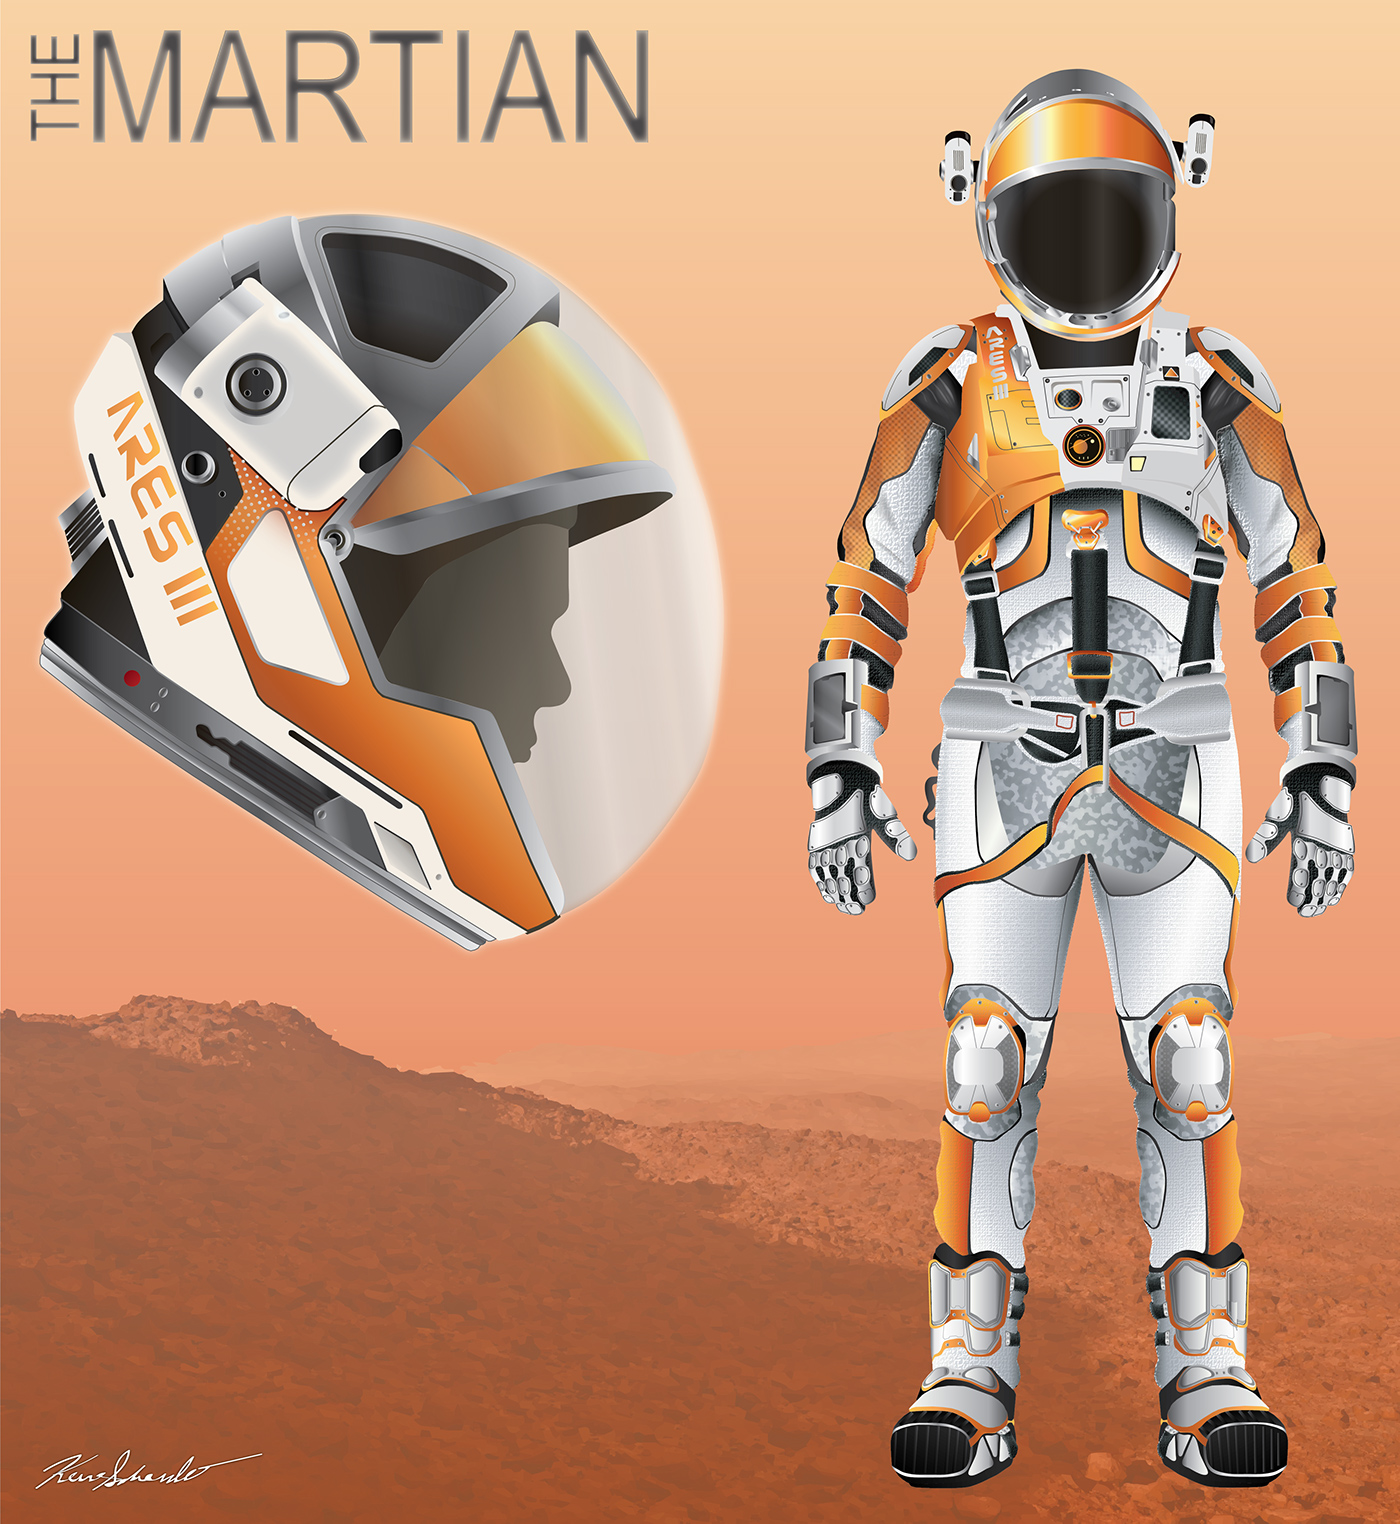 spacesuit Cinema outfit Helmet design costume martian interstellar 2001 A Space Space  outerspace